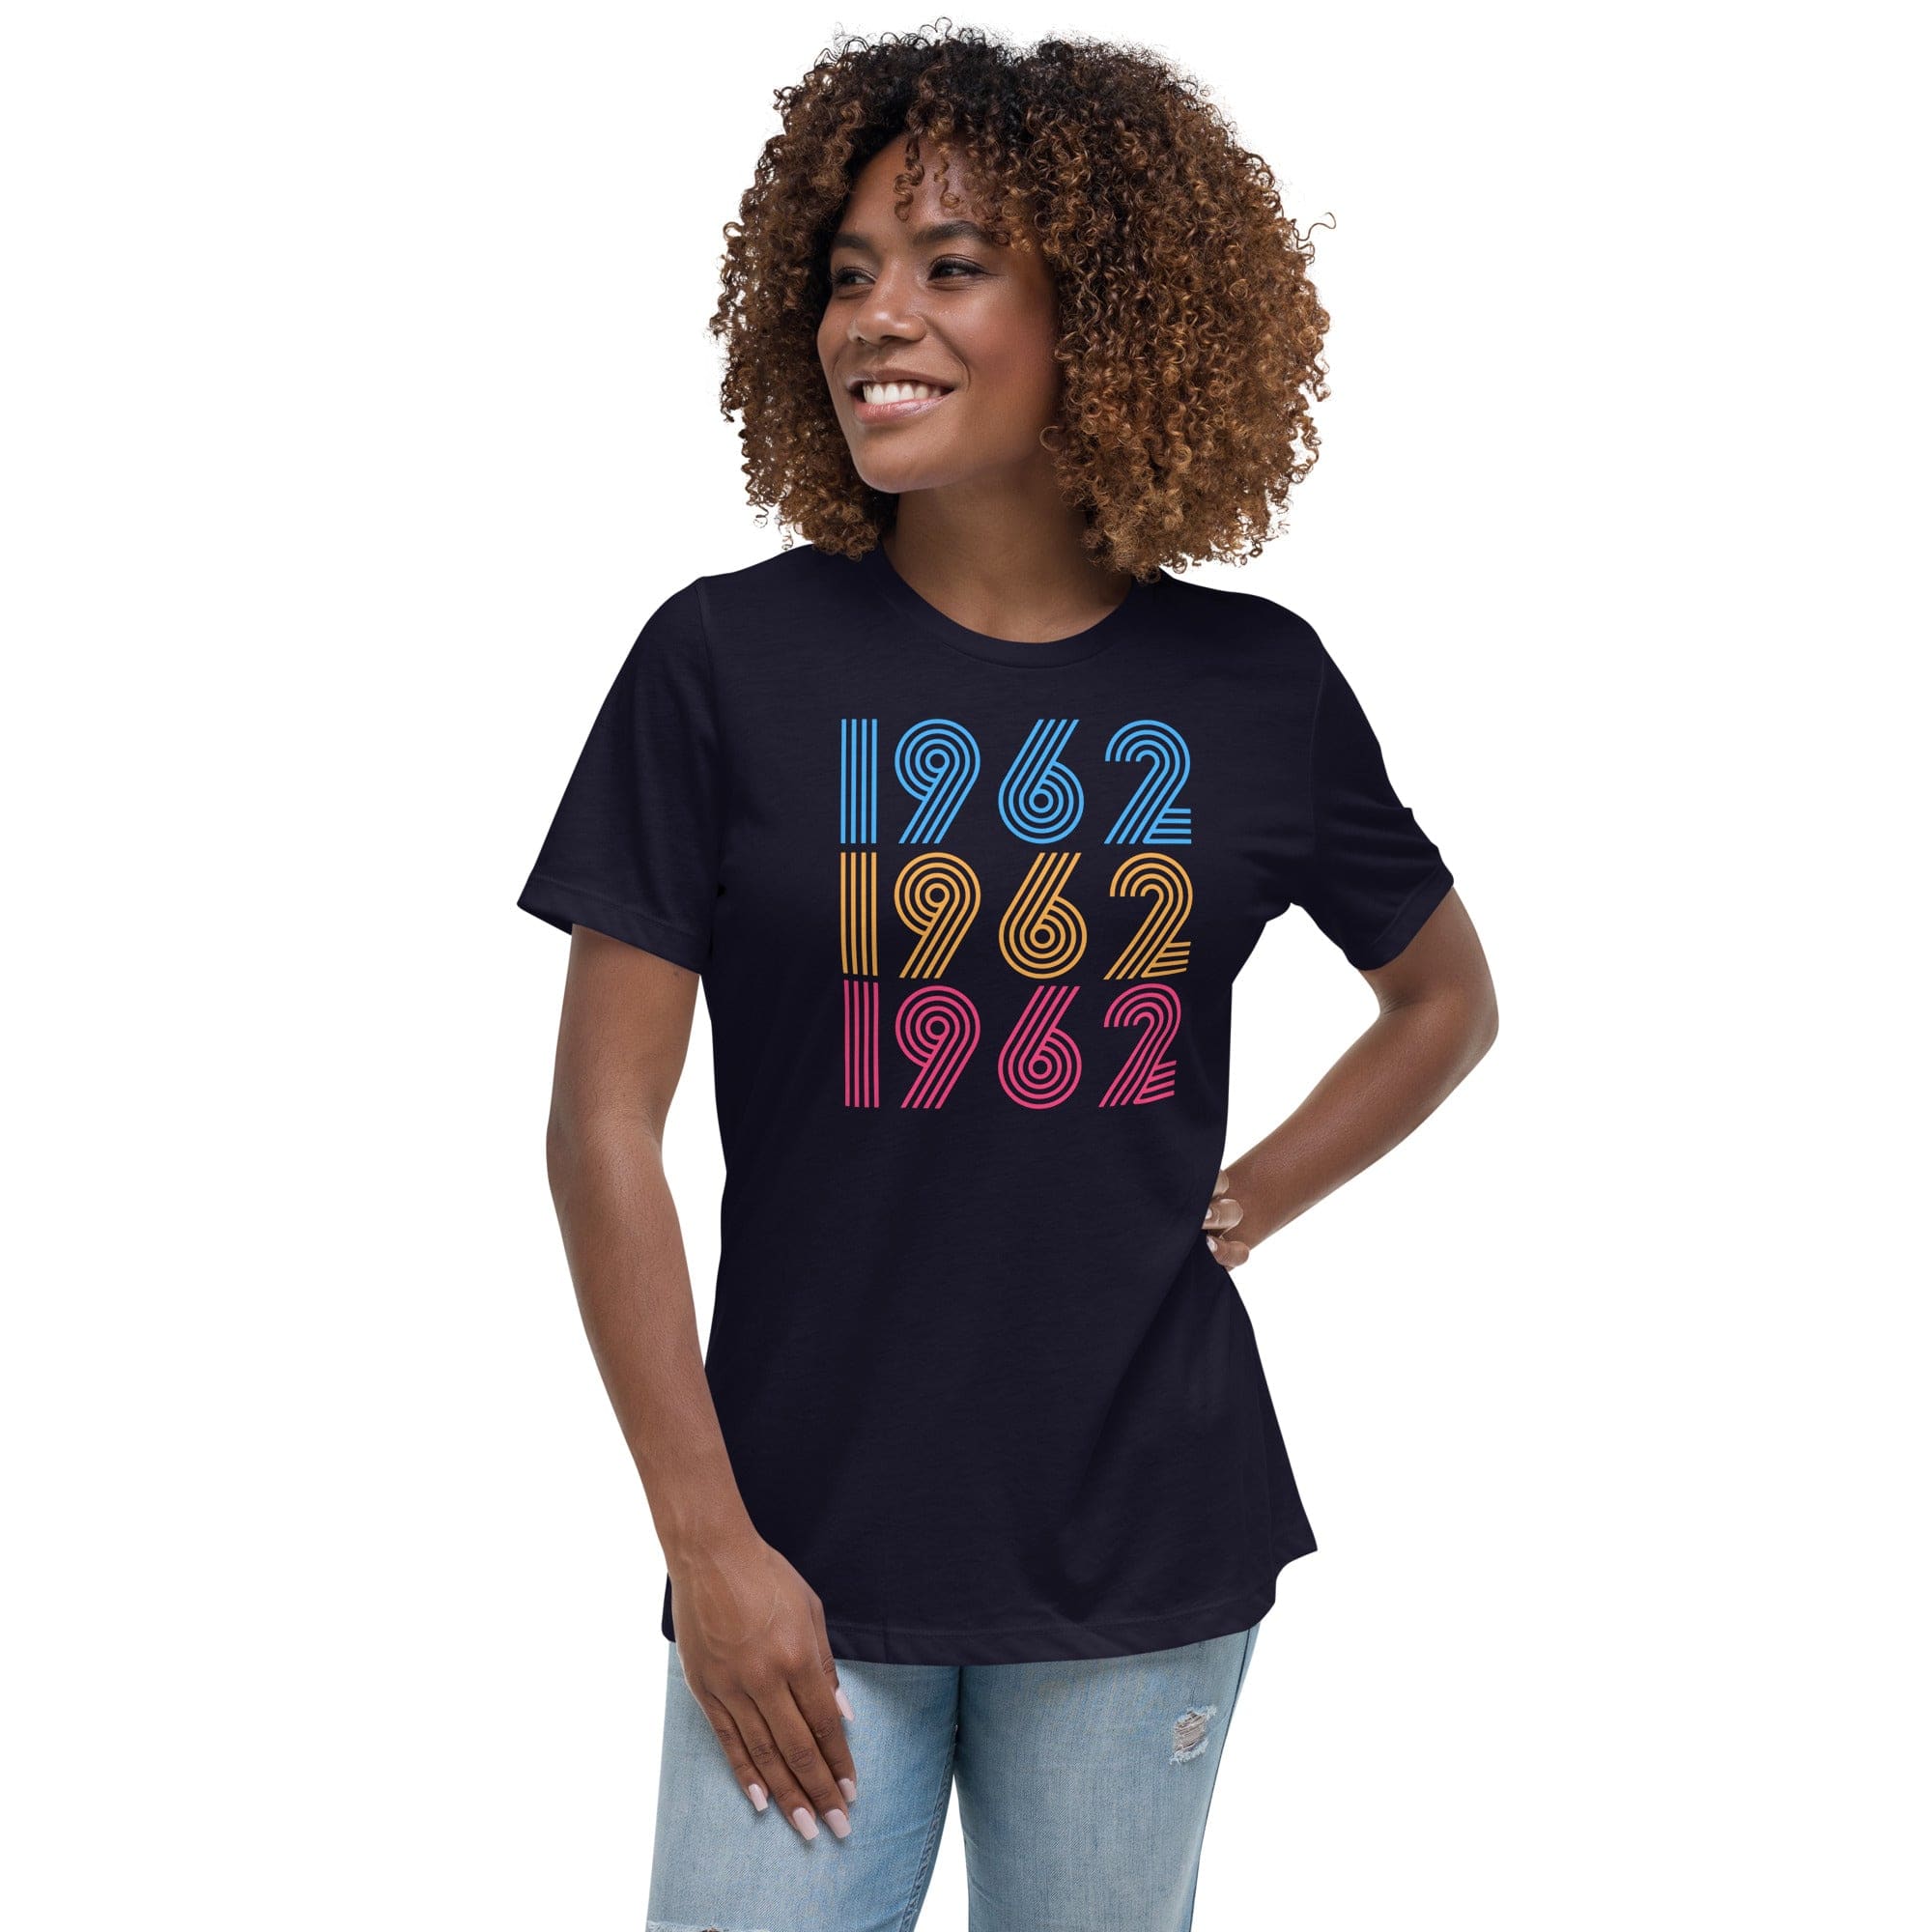 Spruced Roost Women's Clothing Navy / S Vintage 1962 60th Birthday - Celebrate - Happy Birthday -  S-3X